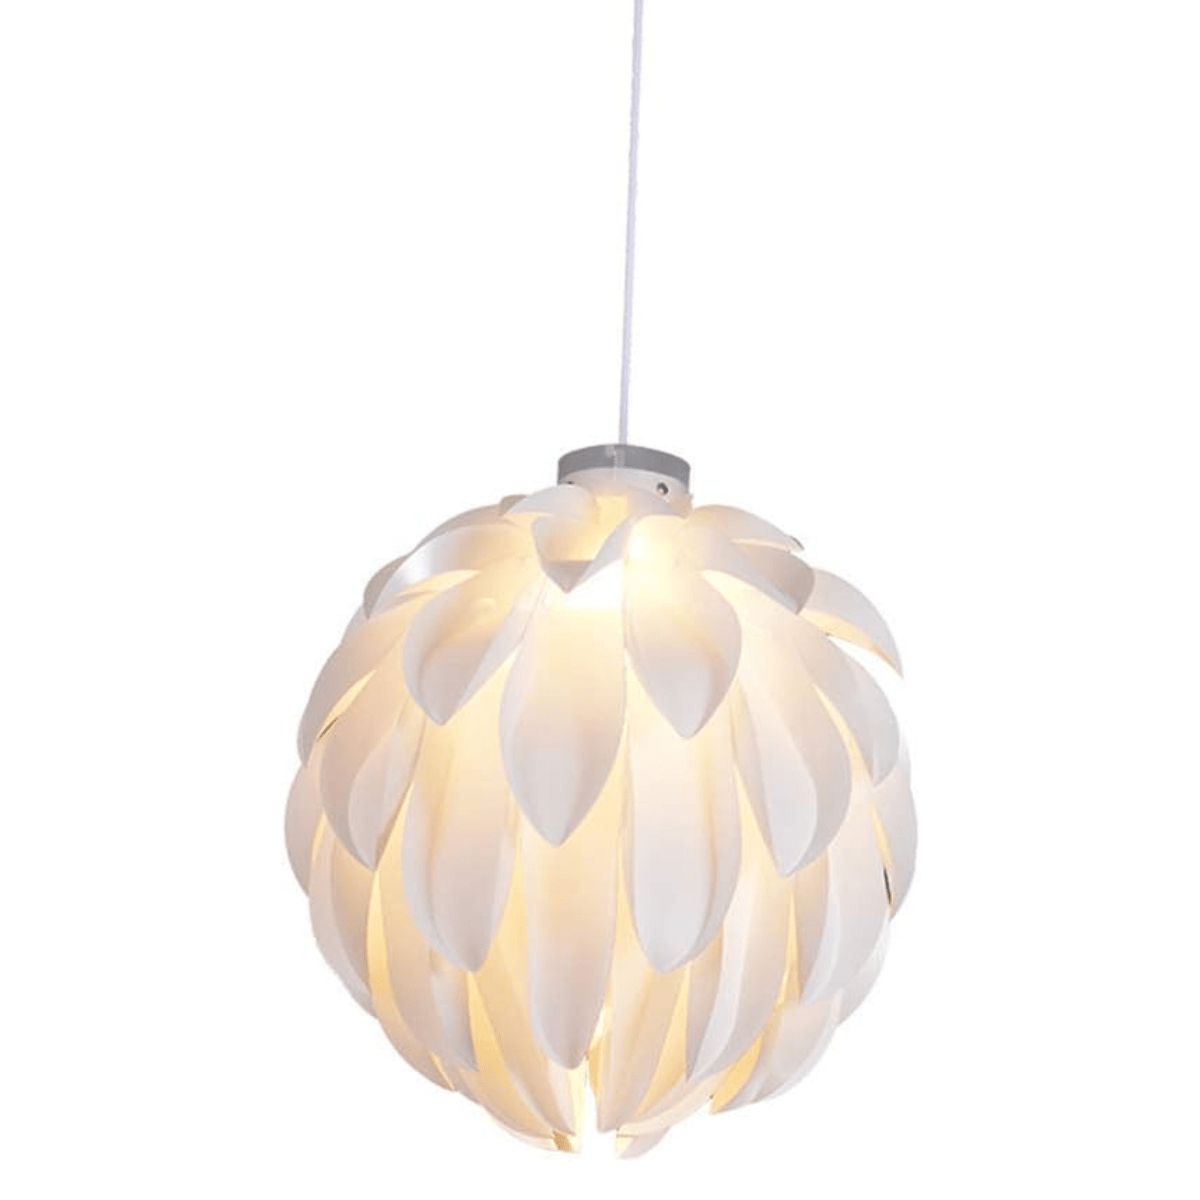 Buy Modern White Petals Pine Cone Ceiling Pendant Chandelier - WH-03 | Shop at Supply Master Accra, Ghana Lamps & Lightings Buy Tools hardware Building materials